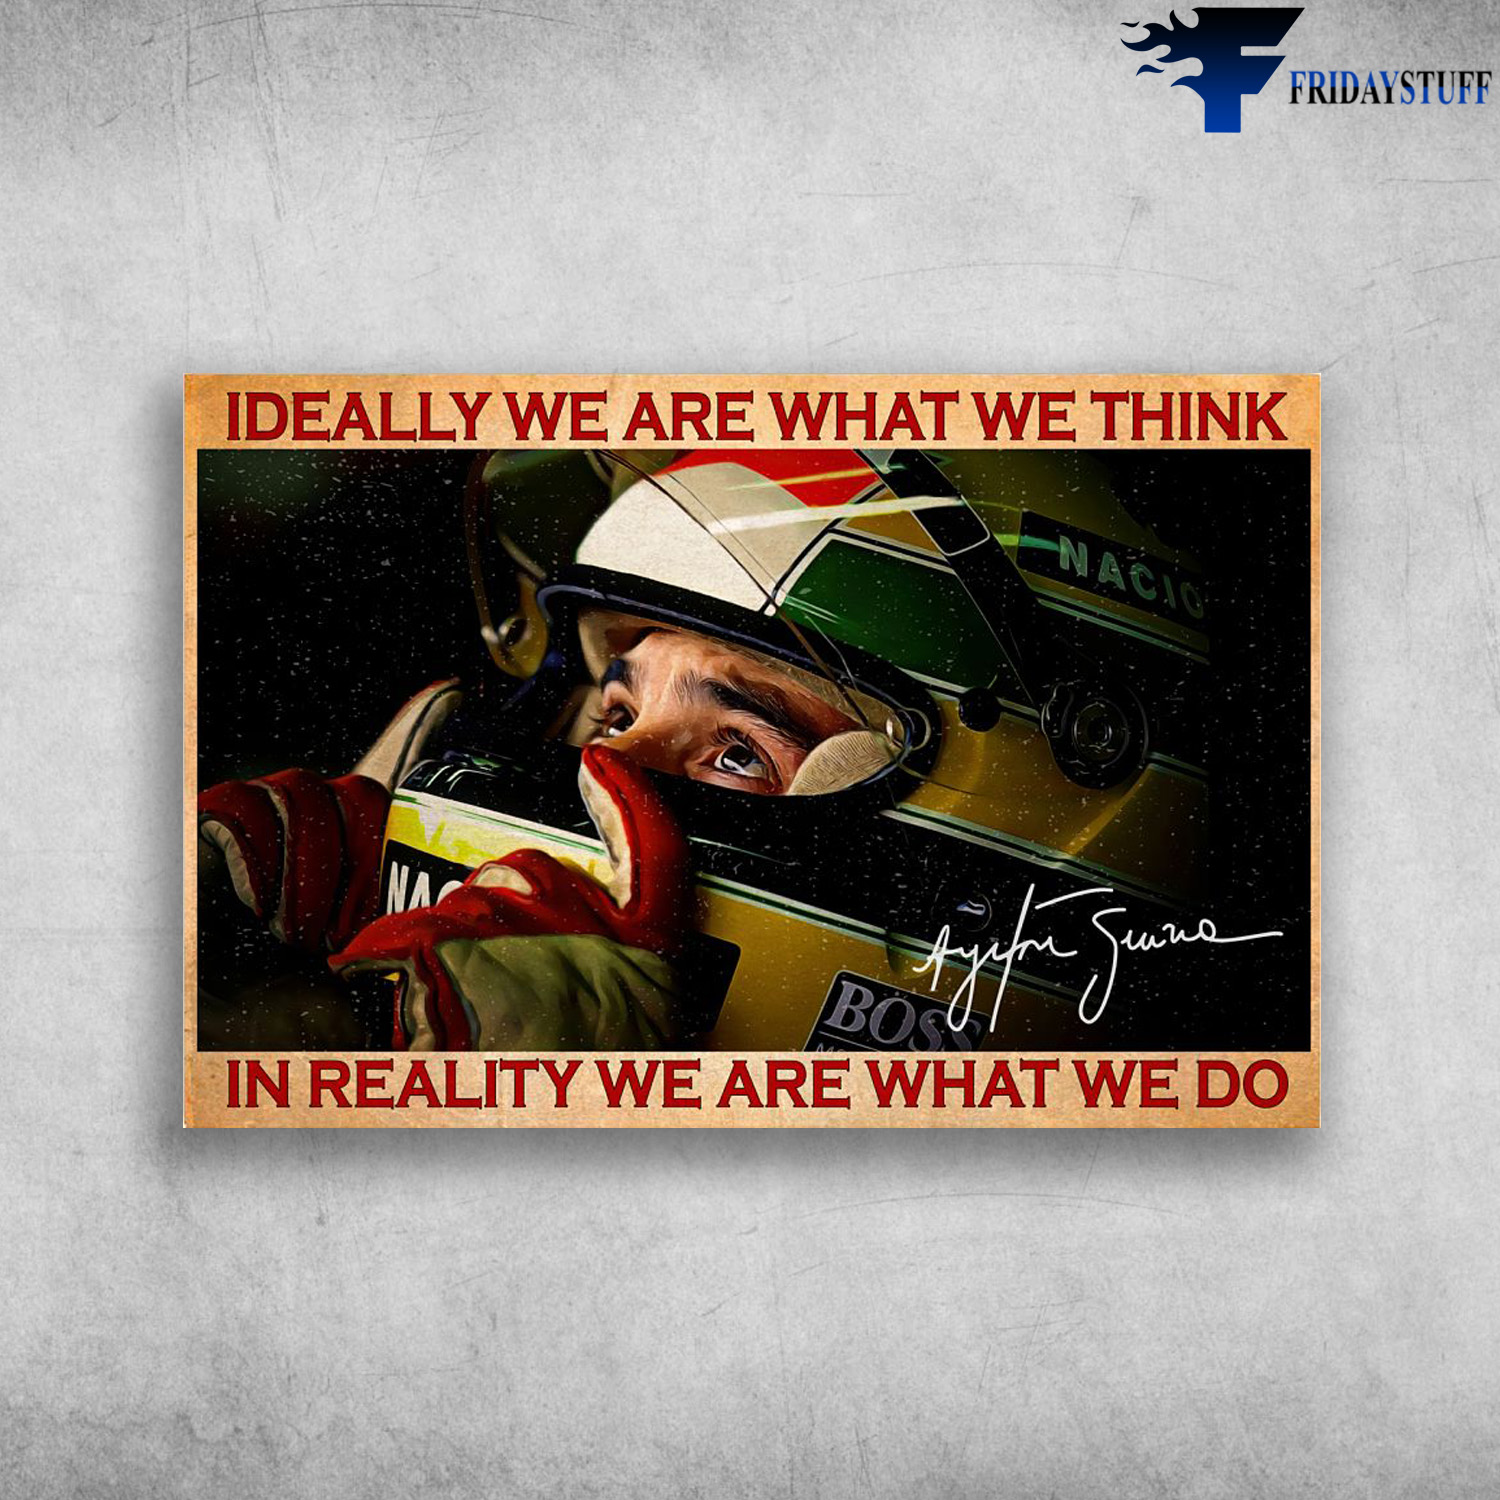 Ayrton Senna - Ideally We Are What We Think, In Reallity We Are What We Do, Formula 1 Racer